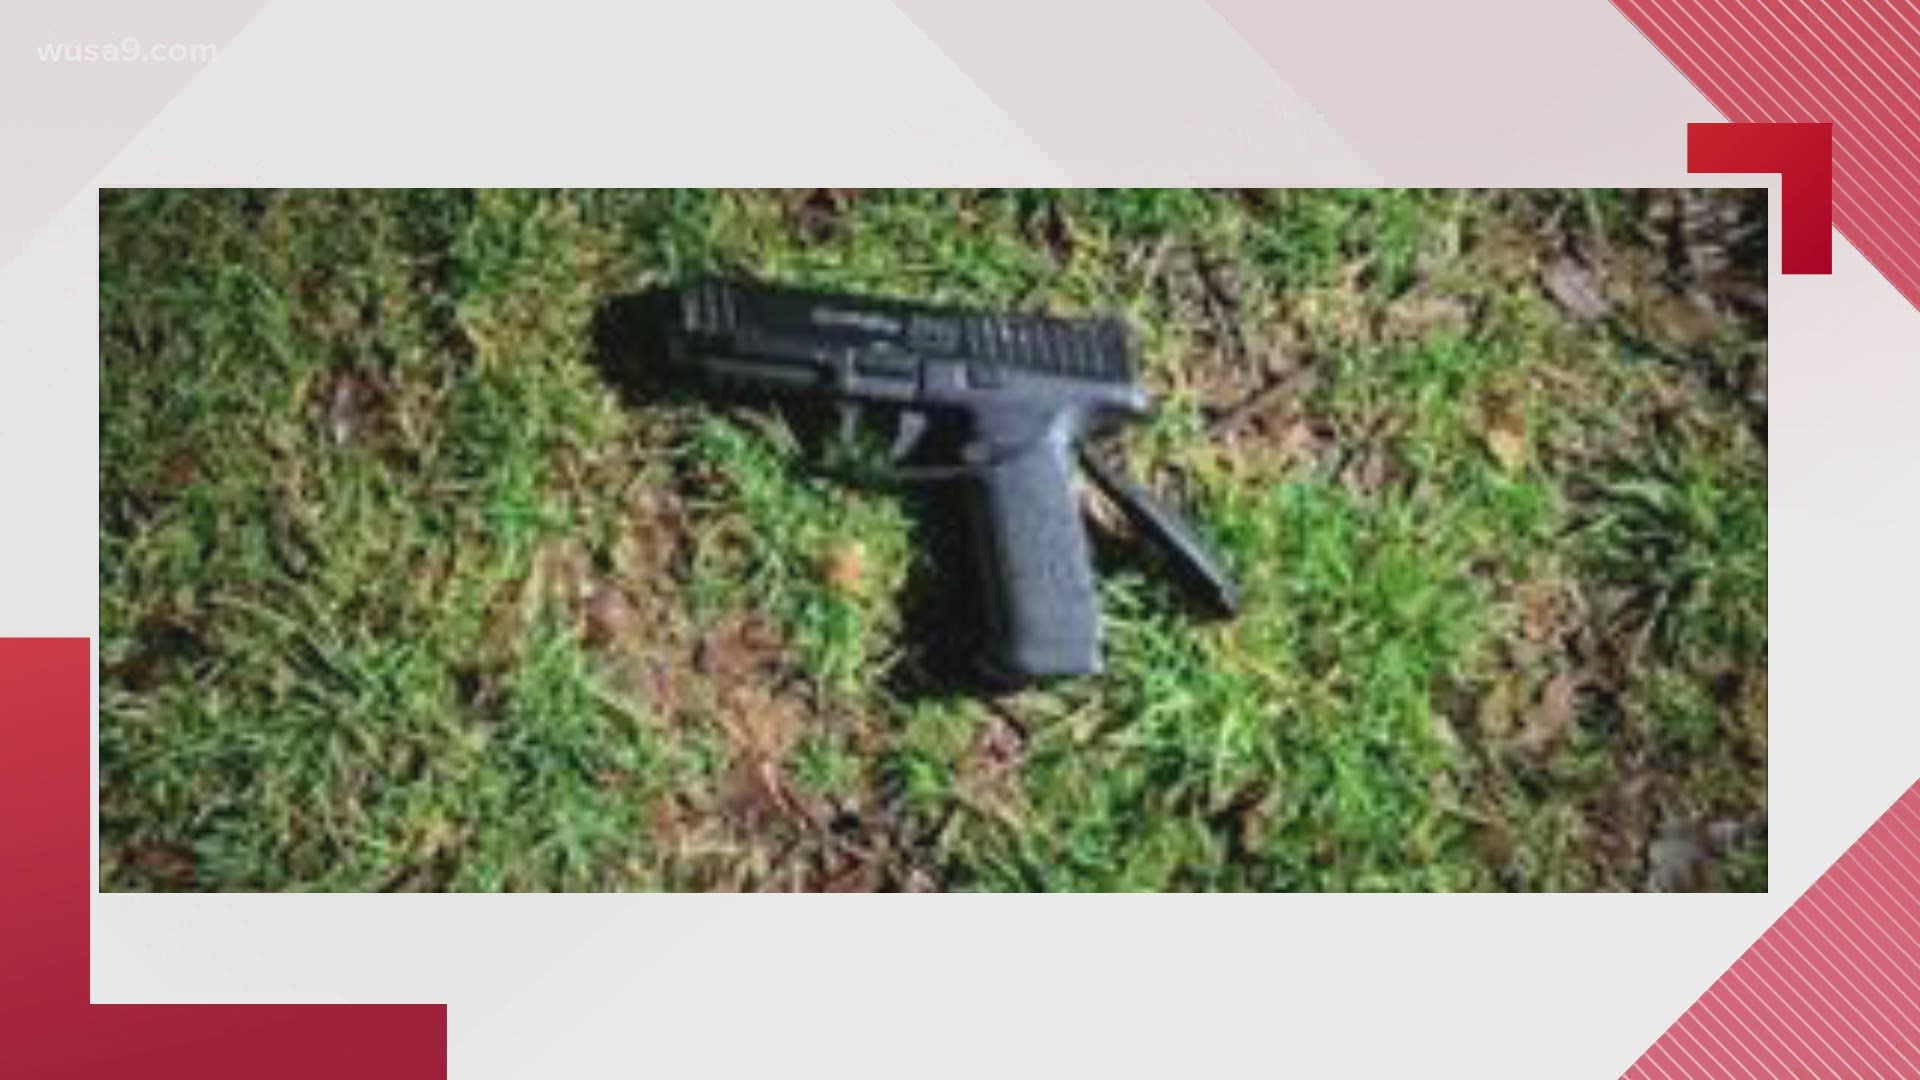 D.C. Police said the juvenile was shot in the 1200 block of Mississippi Avenue, Southeast, after attempting to rob the federal law enforcement officer.